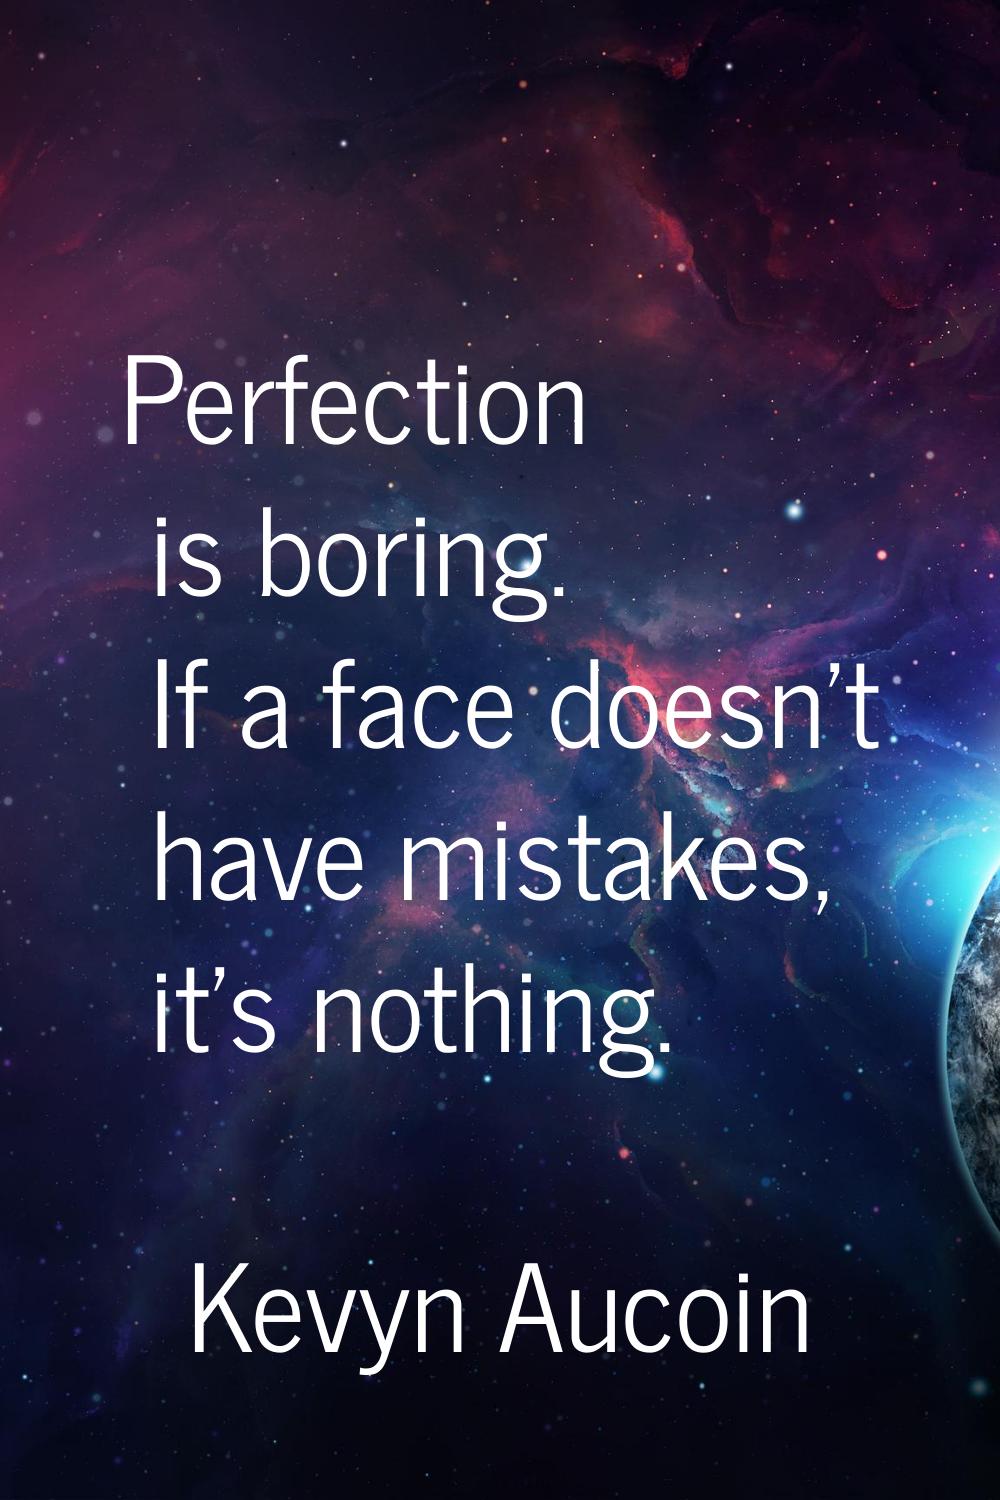 Perfection is boring. If a face doesn't have mistakes, it's nothing.